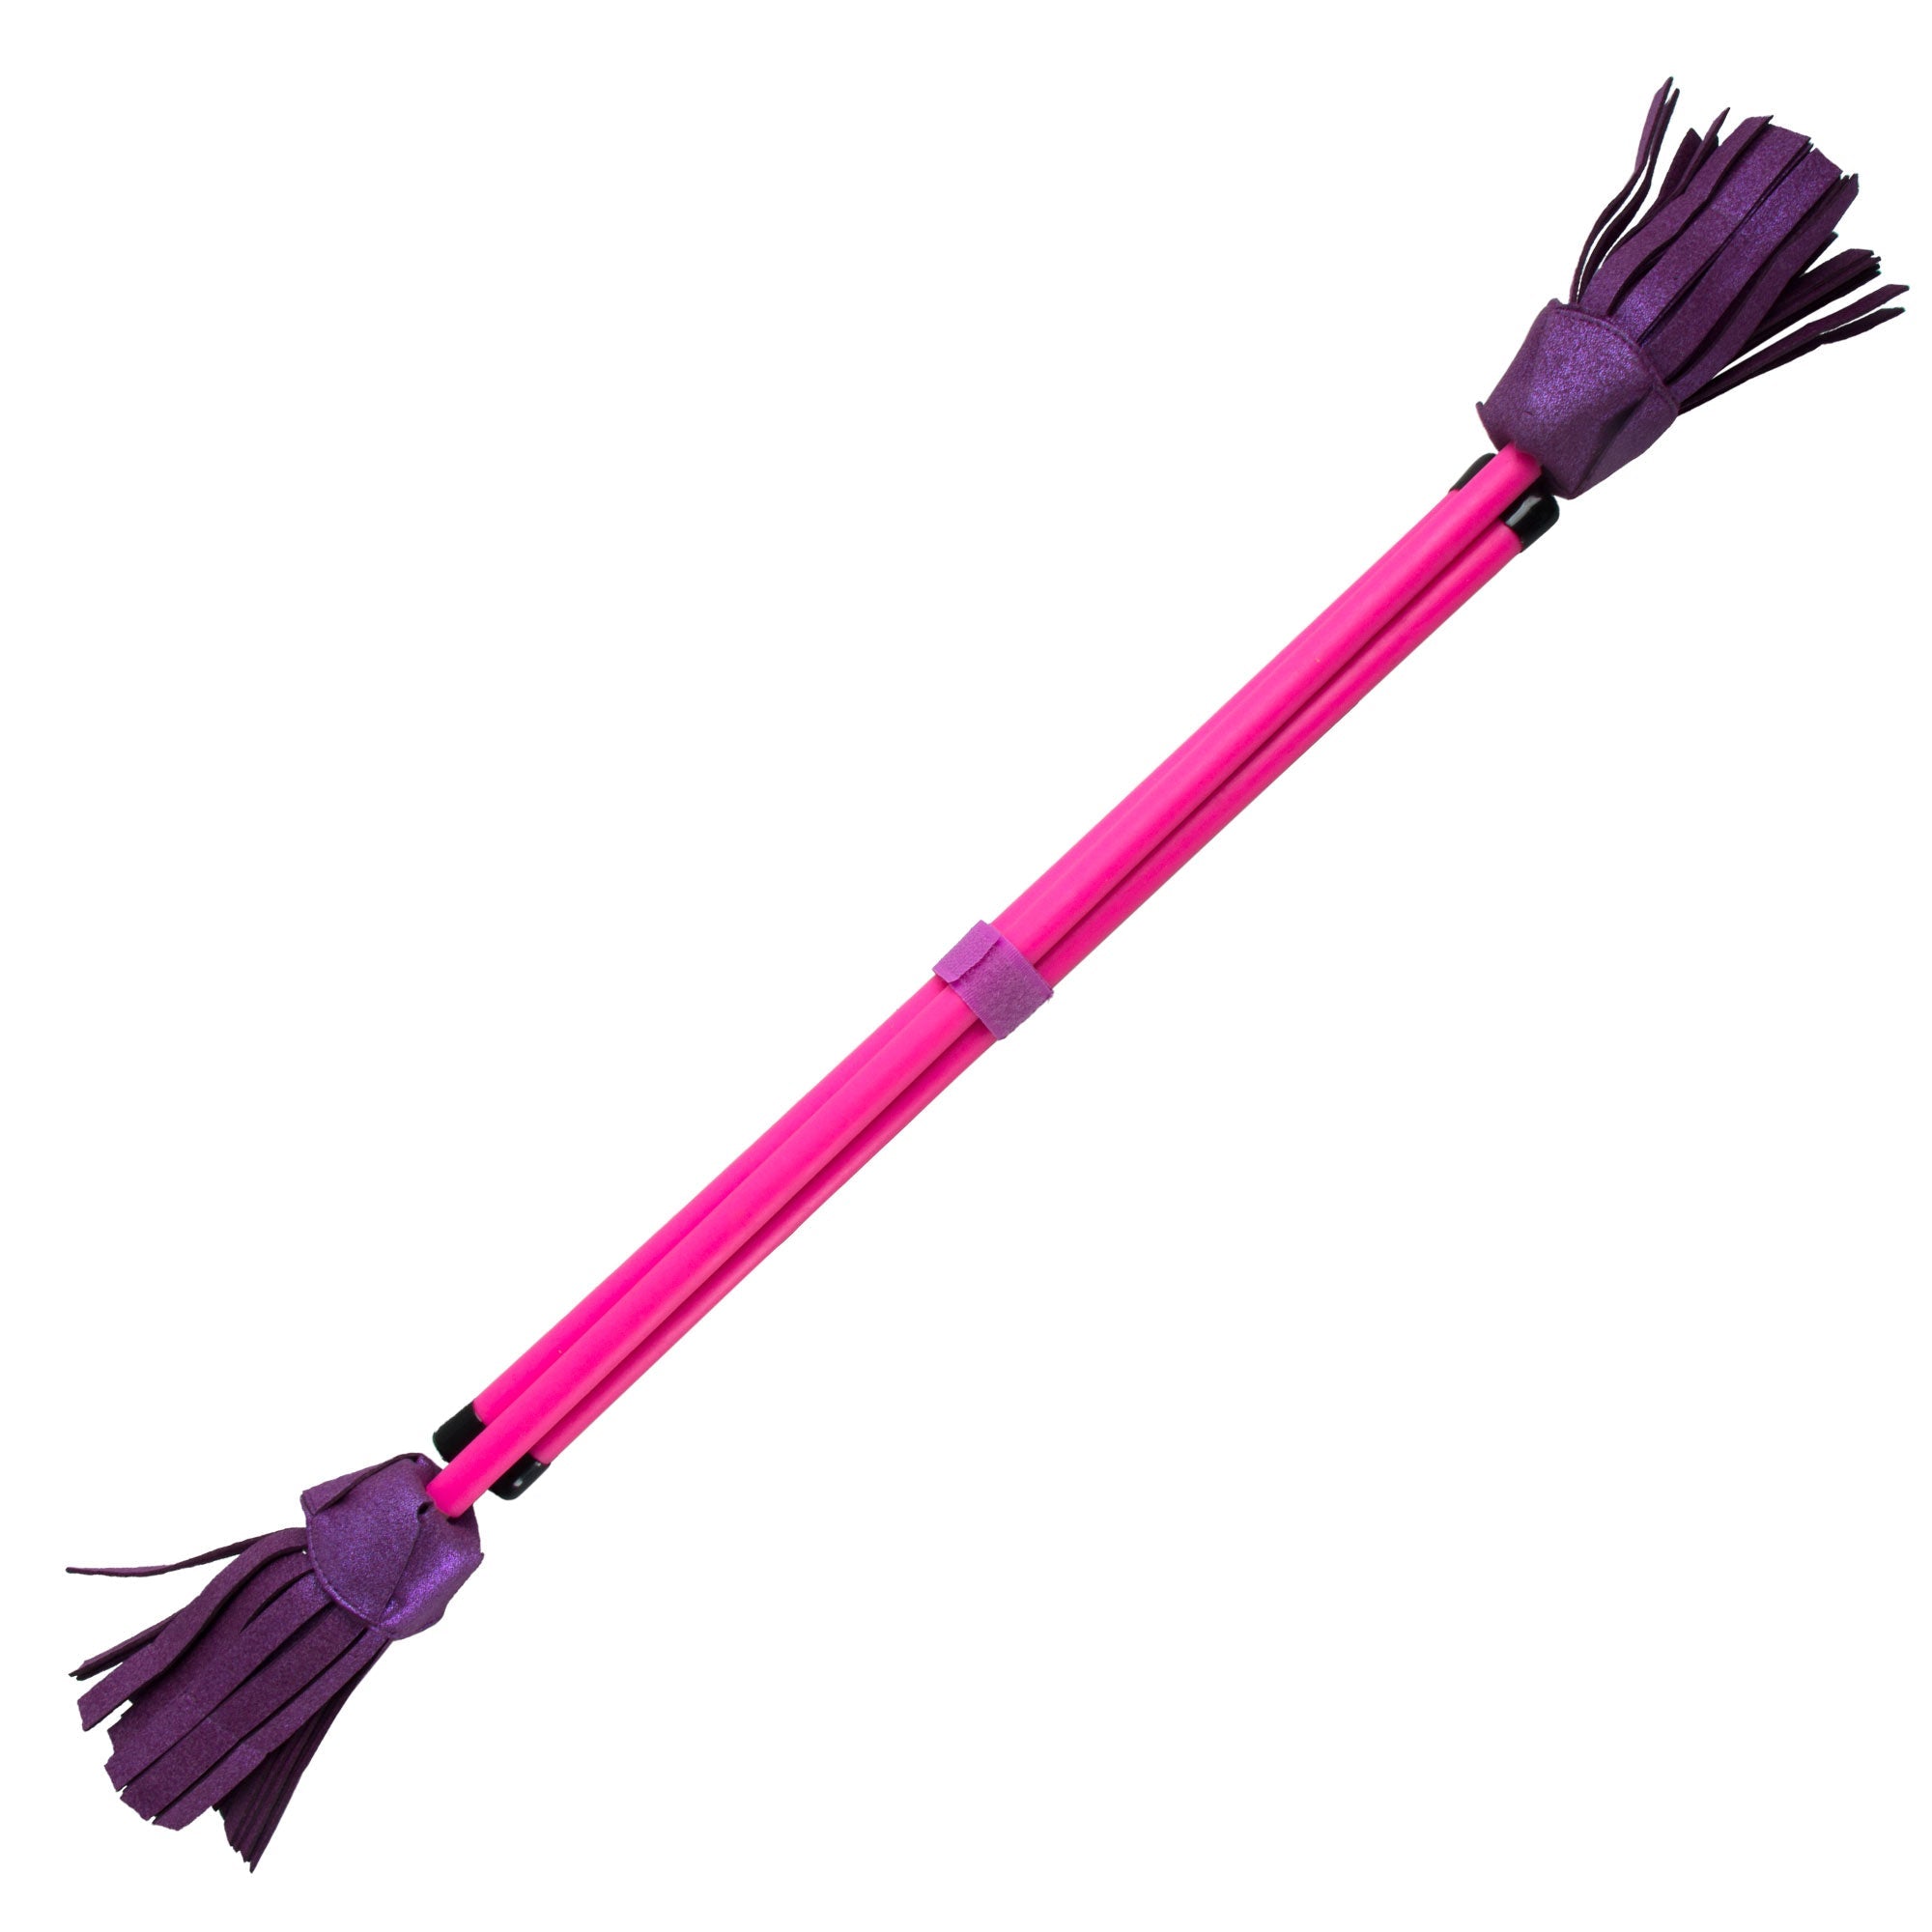 pink neo flower stick and hand sticks strapped together